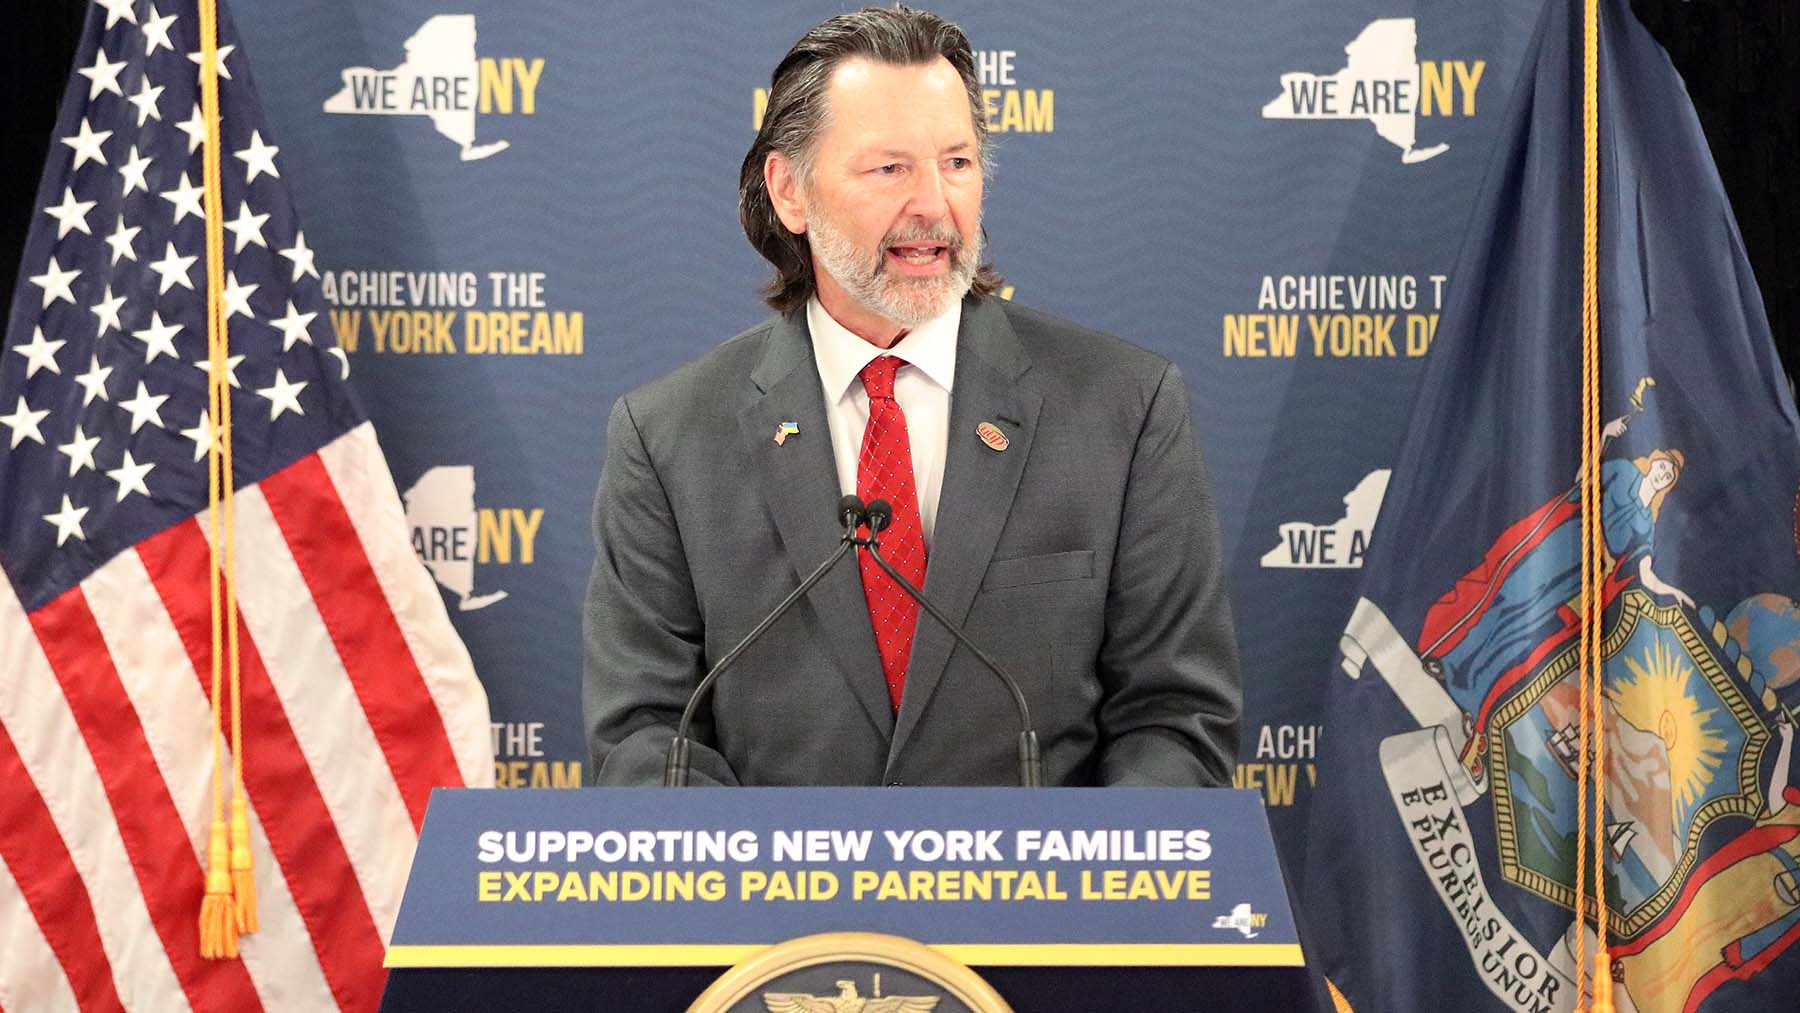 UUP gets Expanded Paid Parental Leave in tentative contract agreement